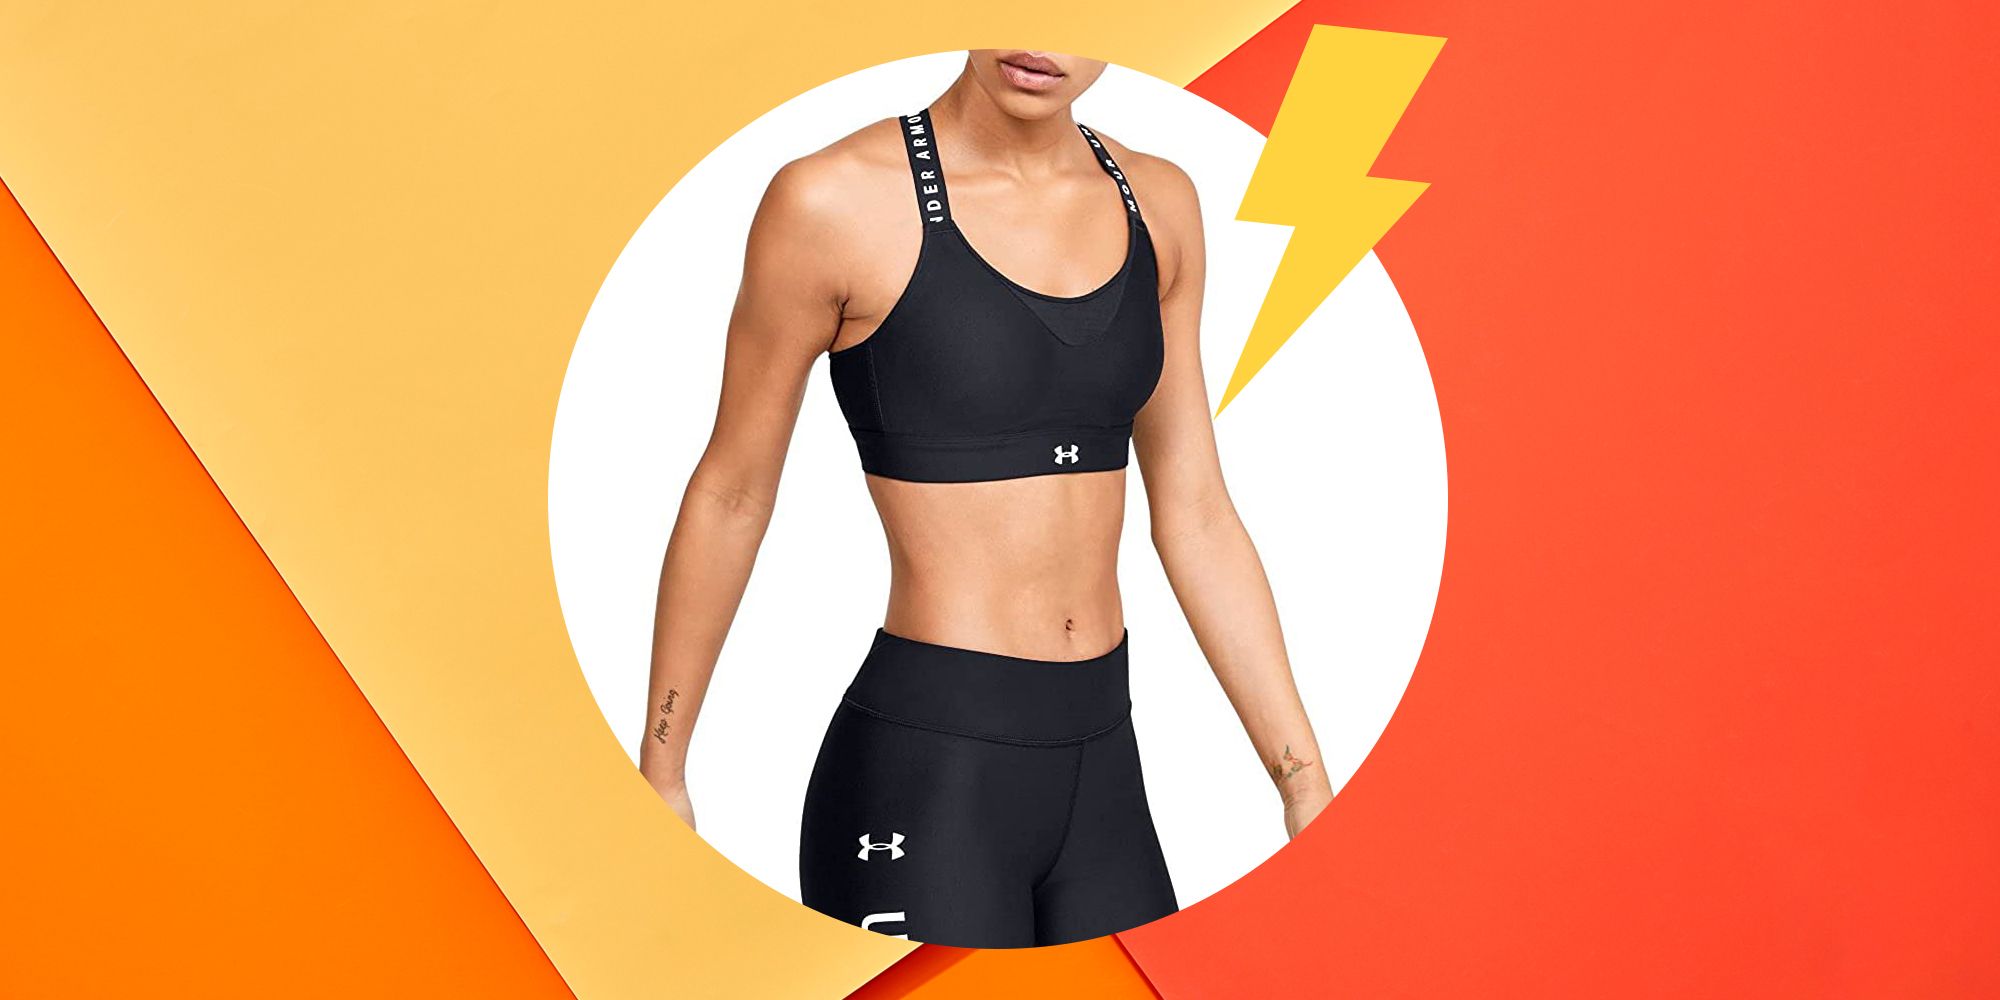 17 Best High-Impact Sports Bras for Women 2021 - Supportive Sports Bras